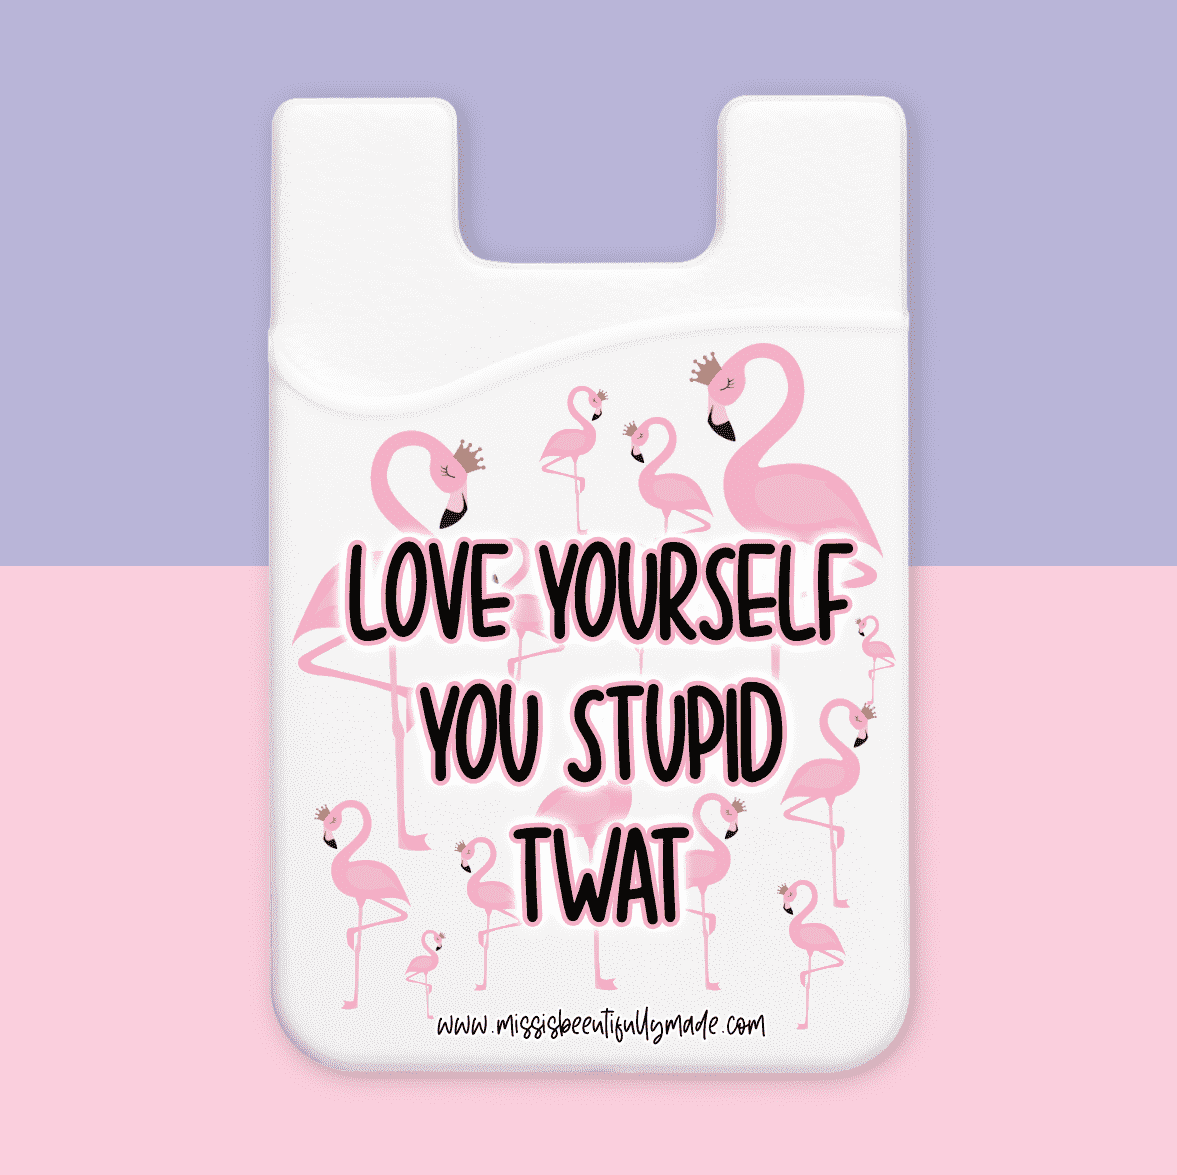 Phone Case Wallet - Love yourself you stupid twat (white)